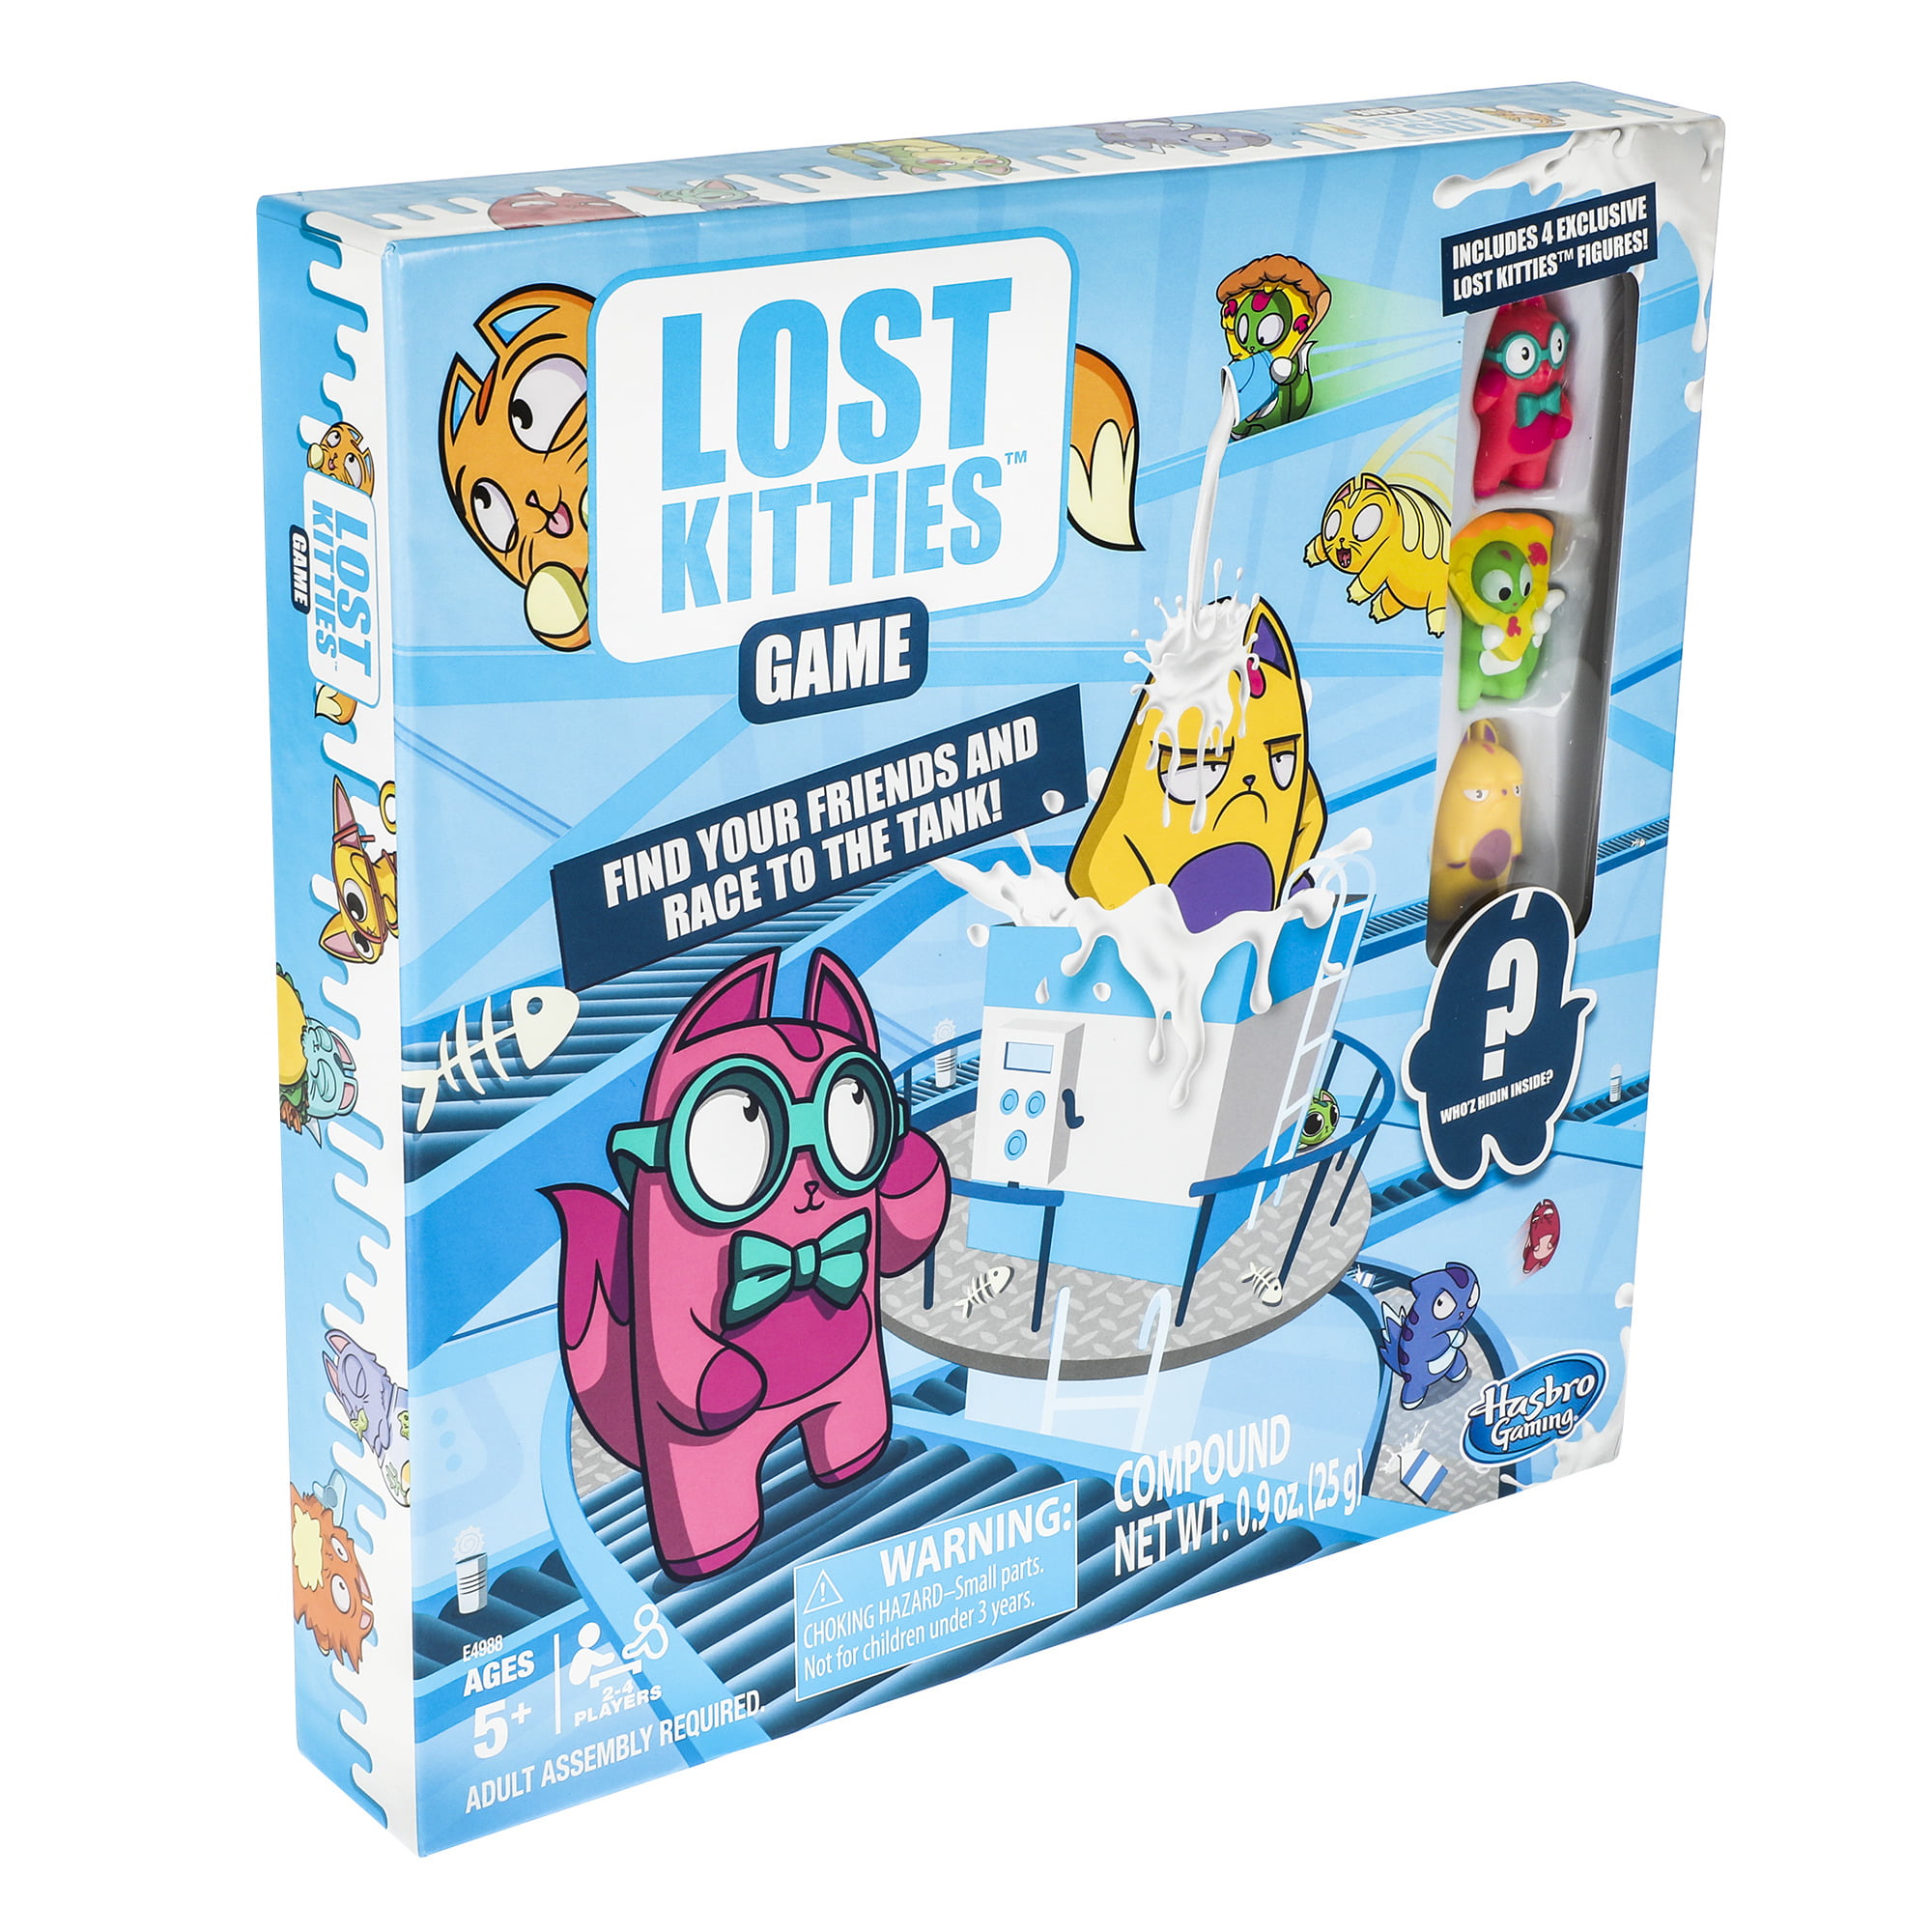 Lost Kitties Board Game 4 Cat Figures Hasbro E4988 for sale online 